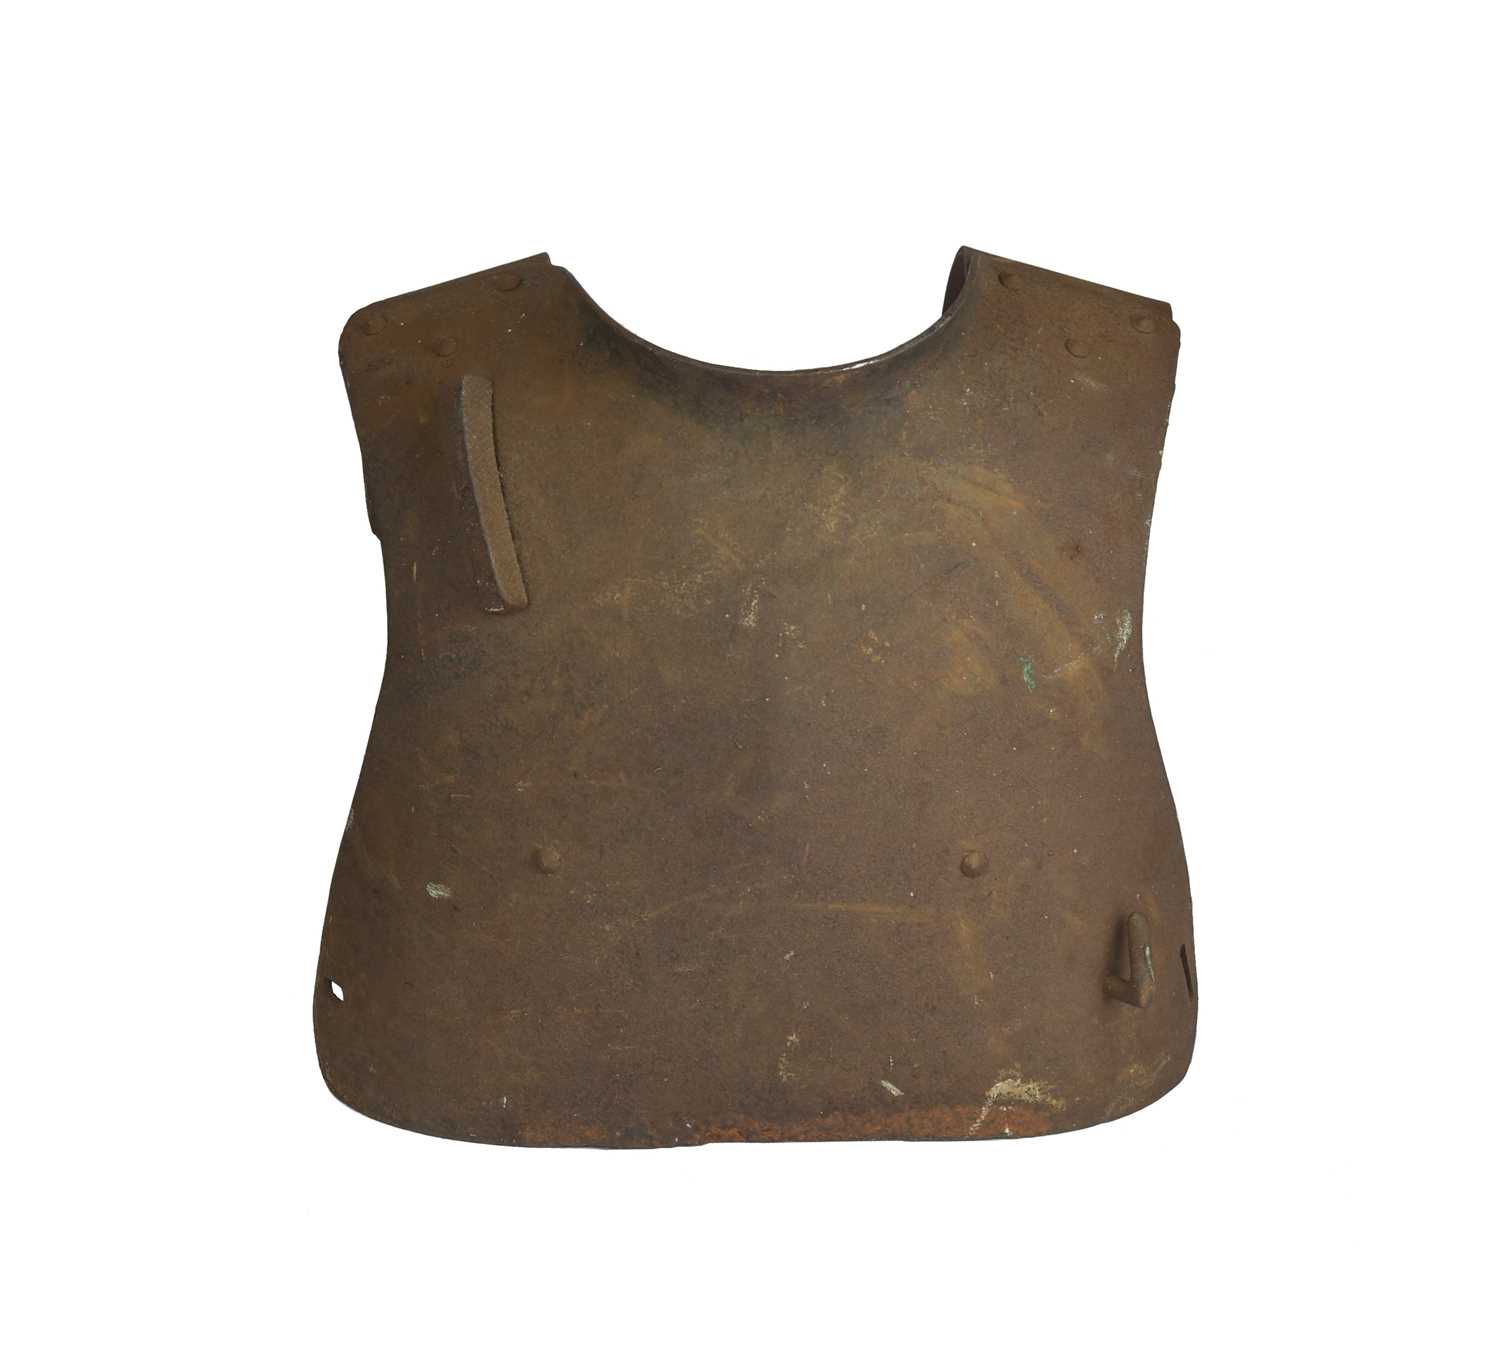 A Great War German sniper's breastplate, with rifle butt retention flange, and the straps and pads